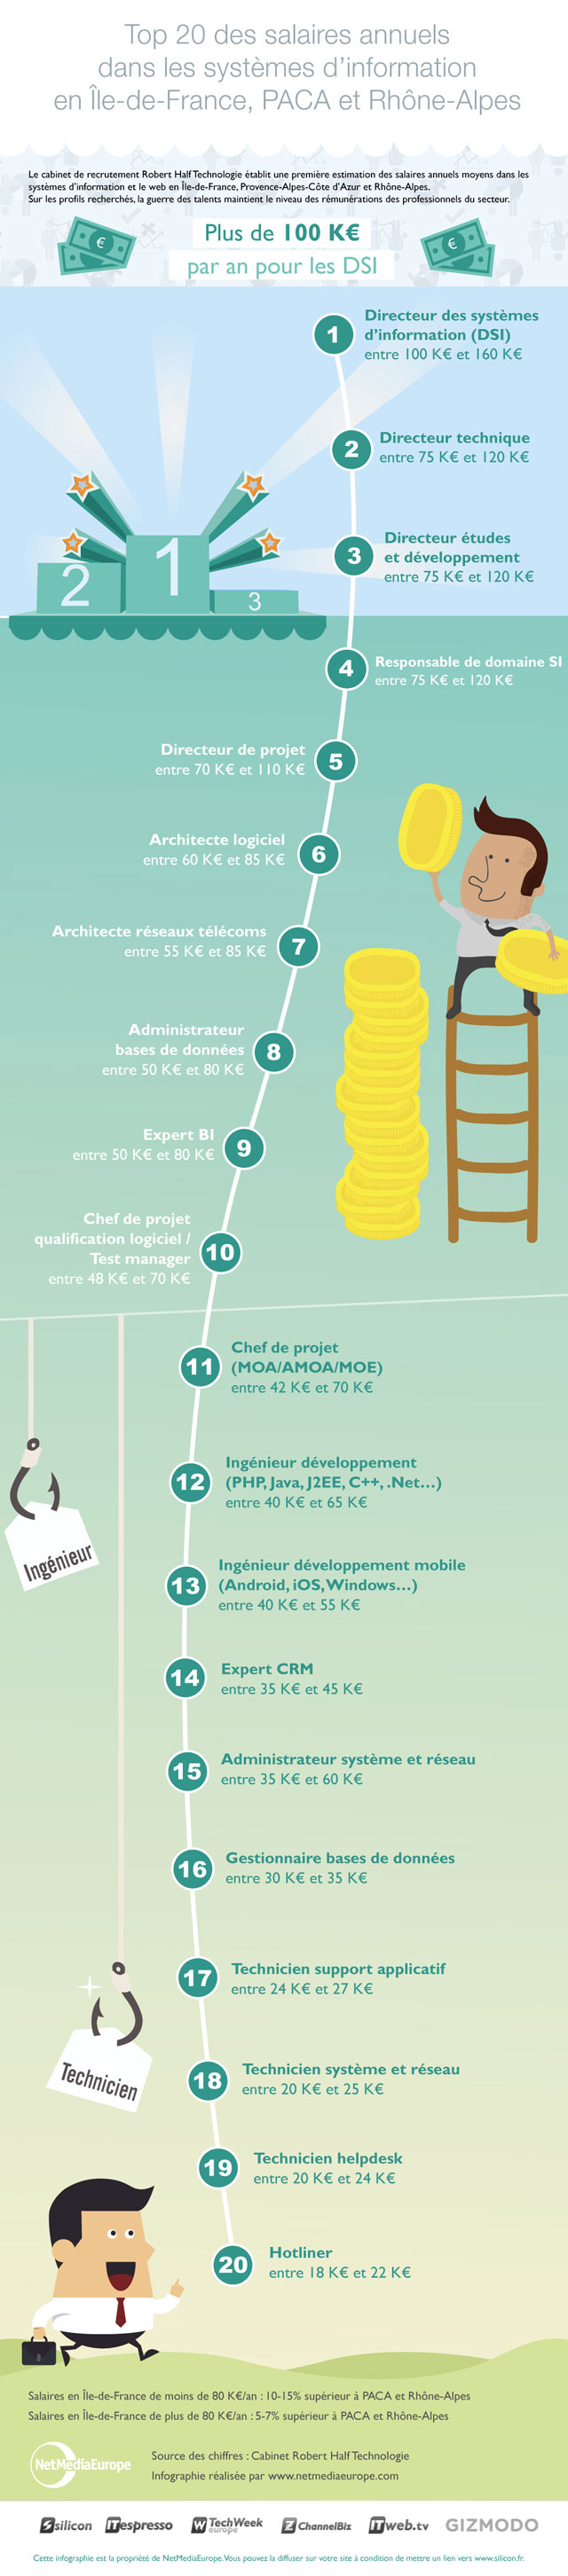 top 20 salaires it france